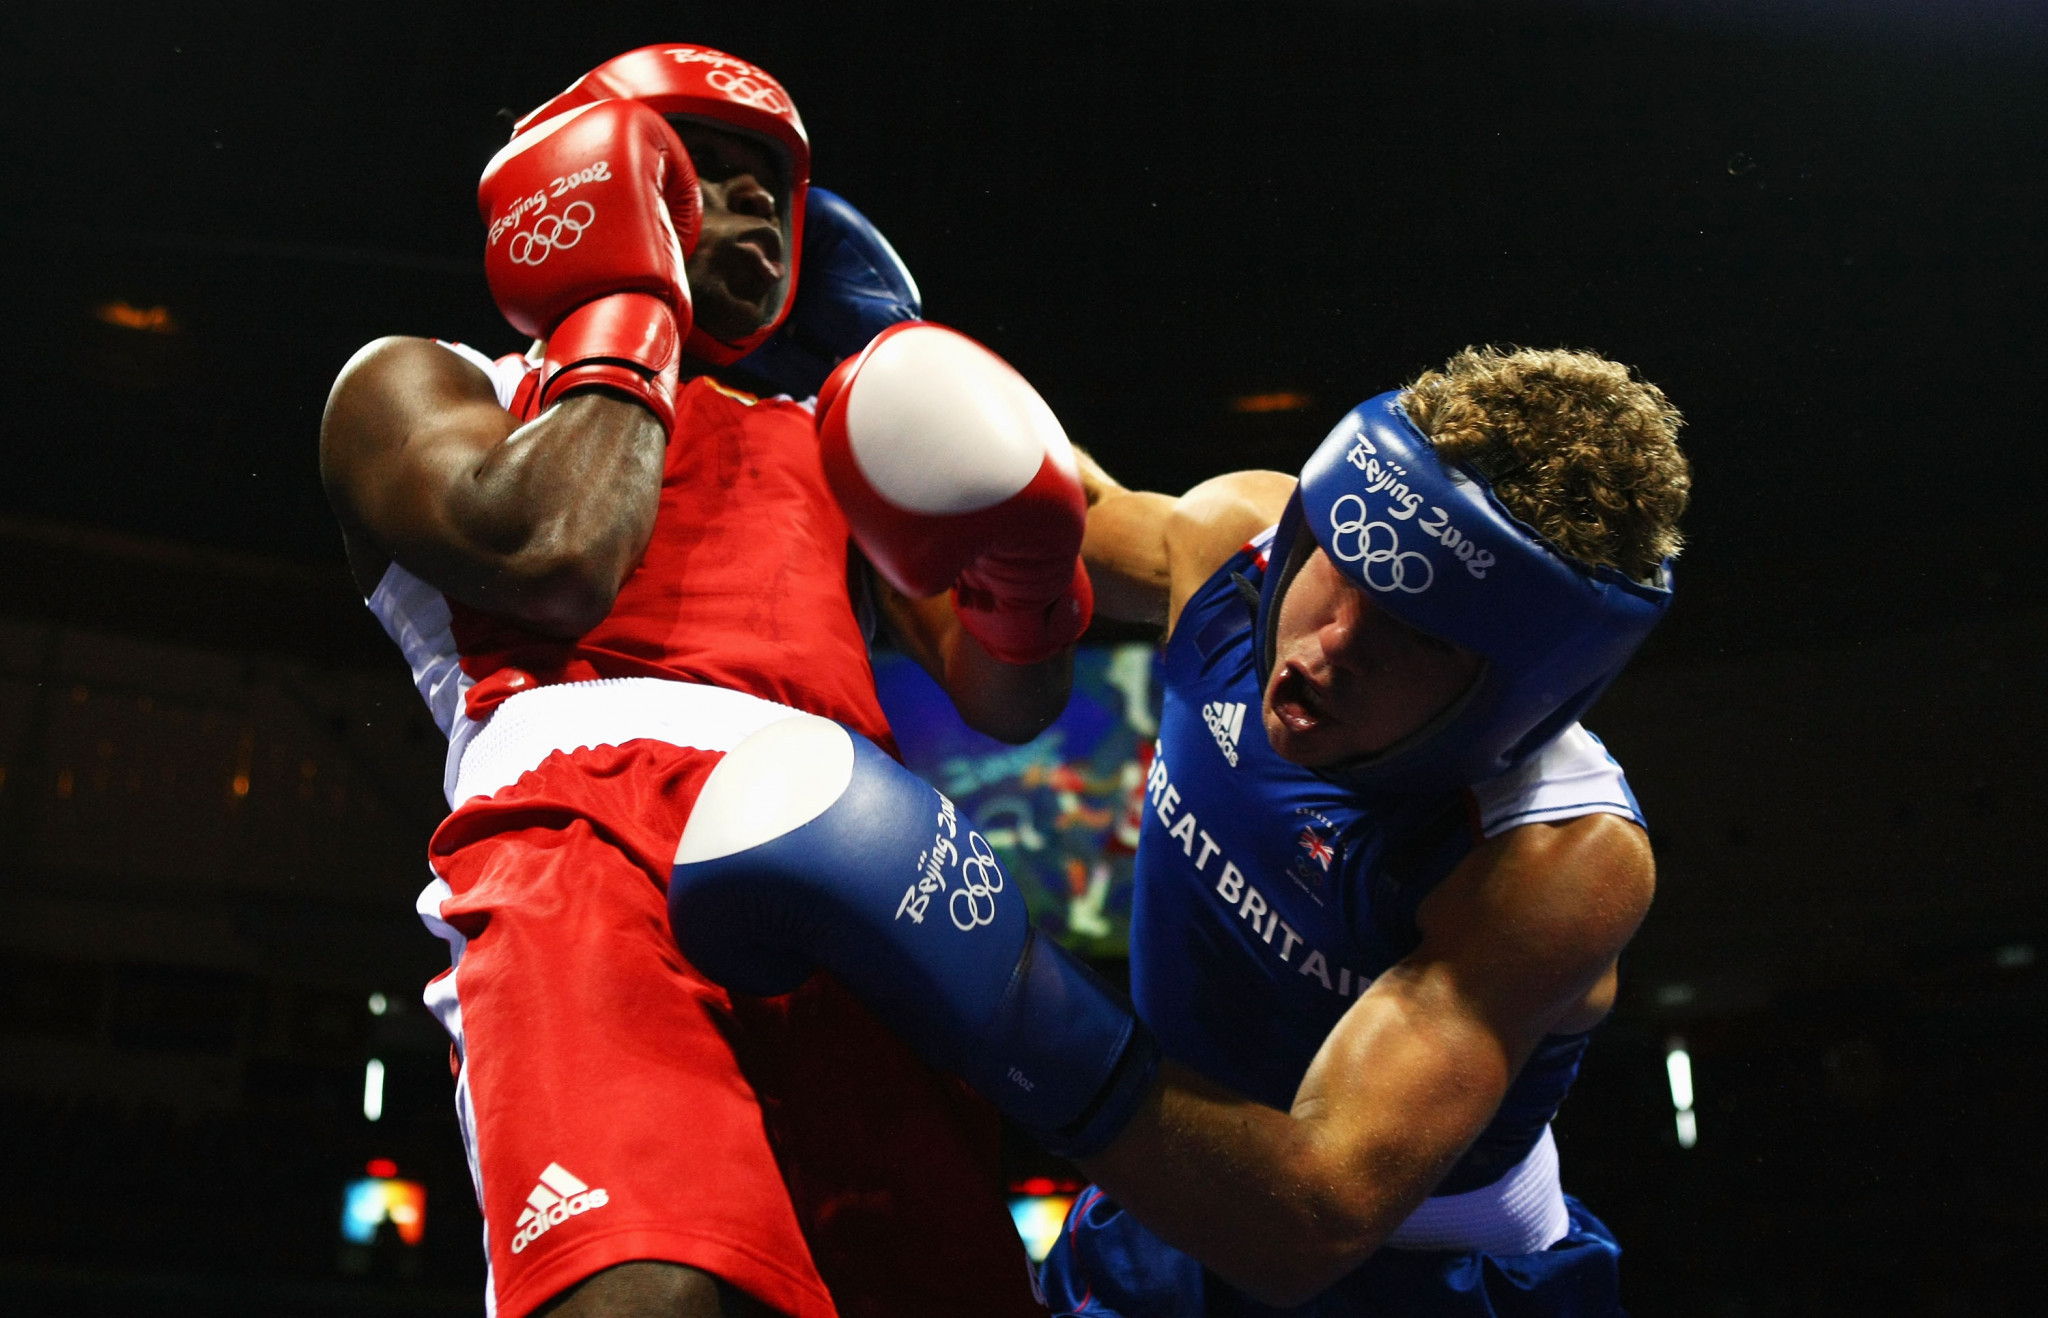 Billy Joe Saunders lost in the second round at Beijing 2008 ©Getty Images